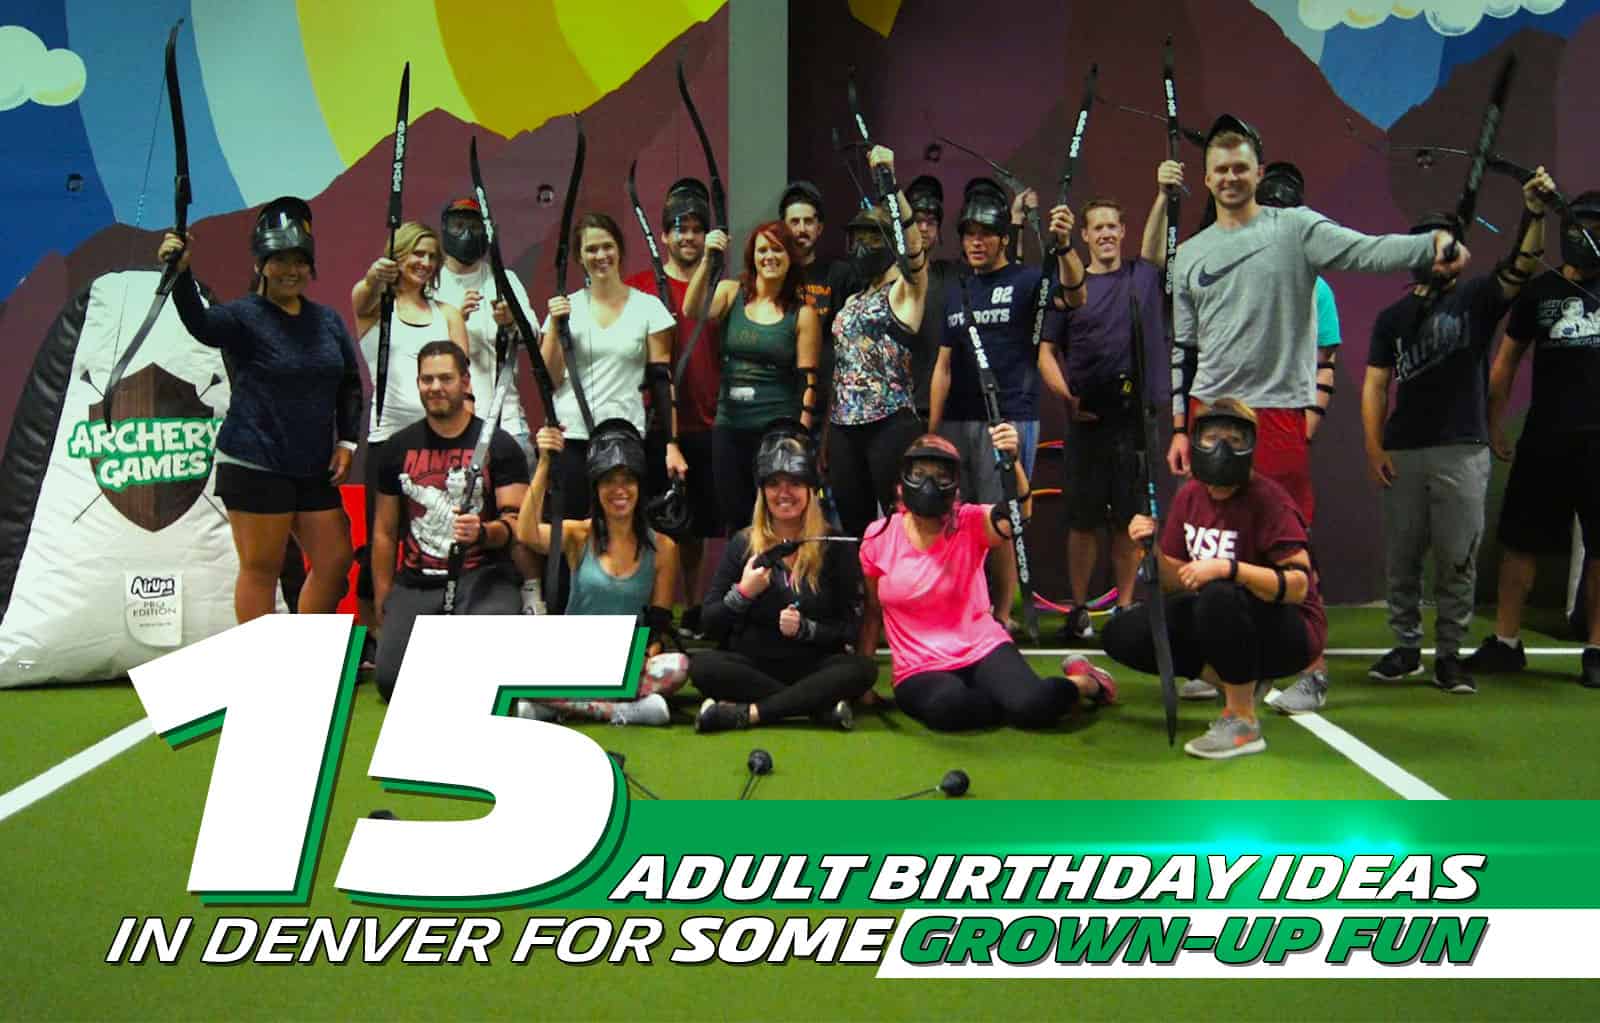 15 Adult Birthday Ideas In Denver For Some Grown-Up Fun